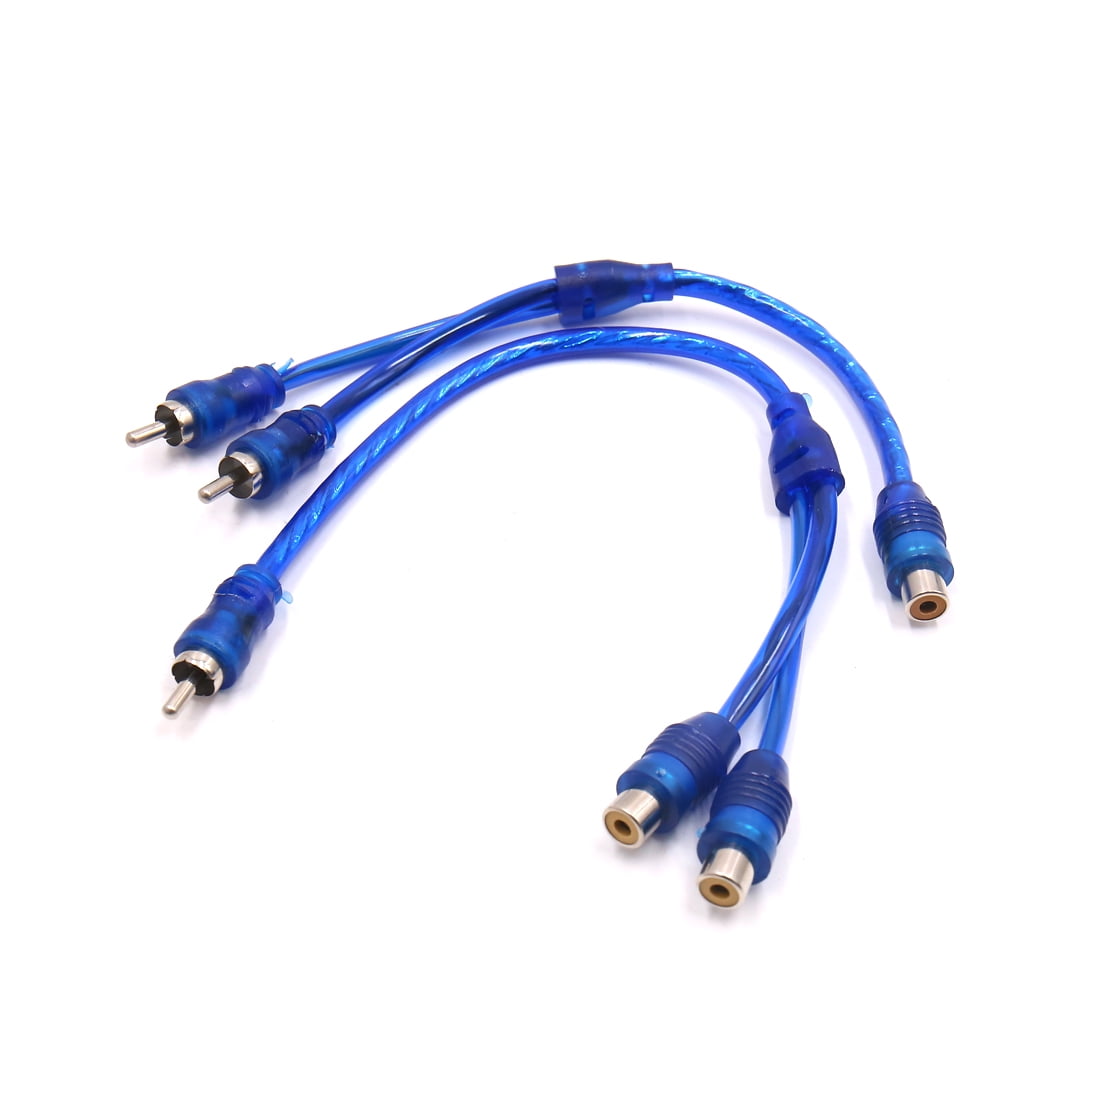 NEW VOODOO Car Audio RCA Interconnect cable BLUE OFC Copper Y 